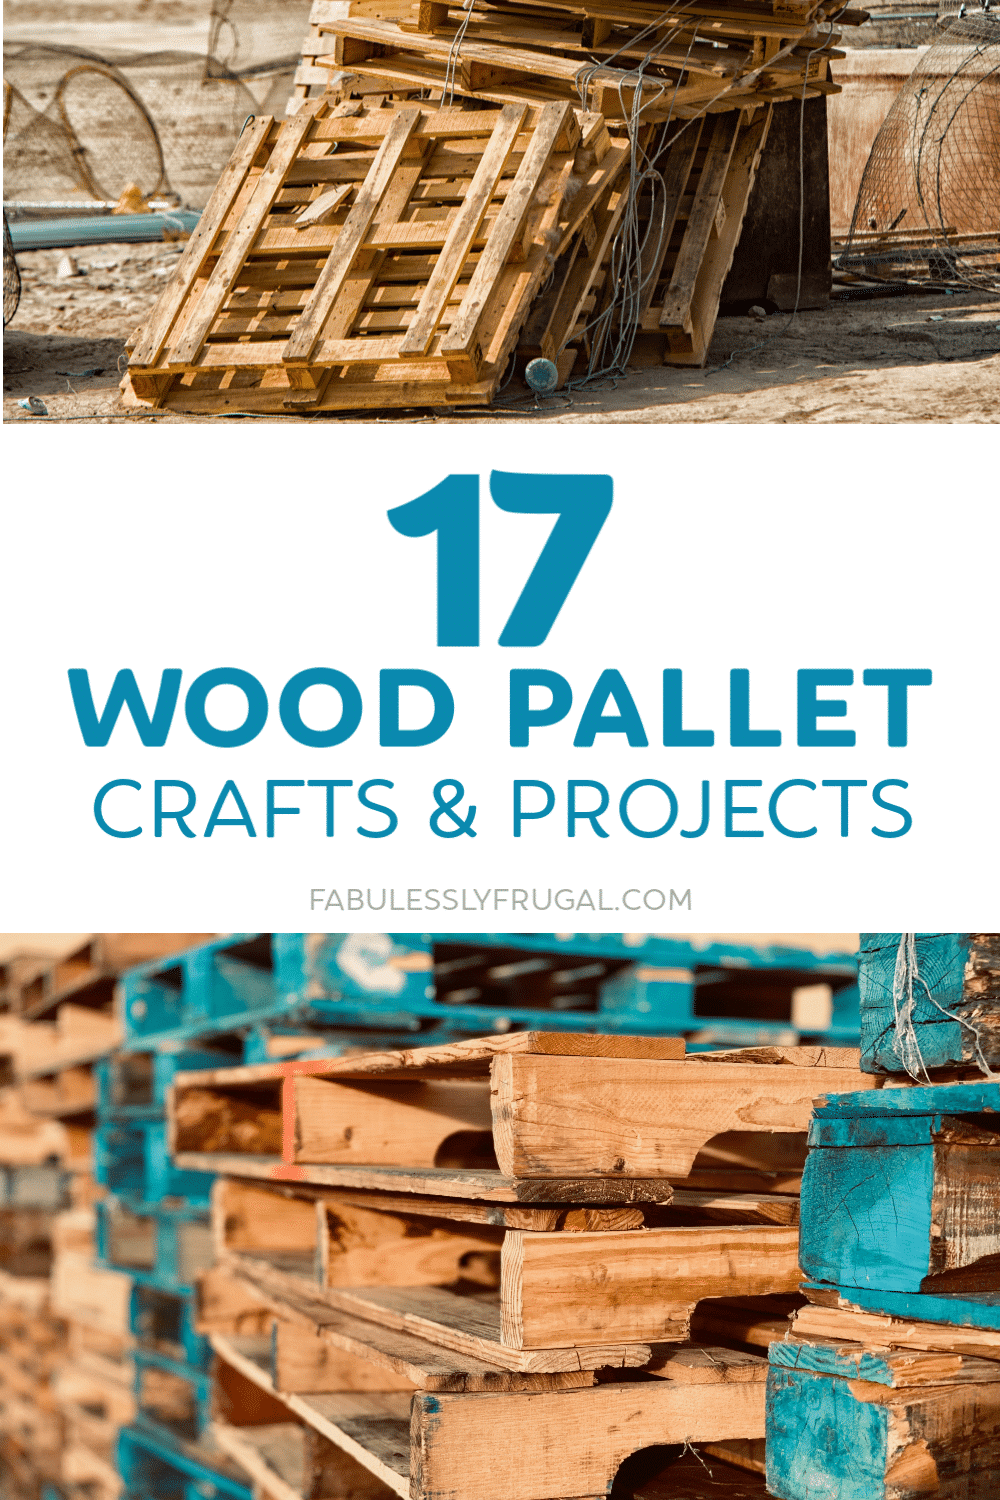 What to make with wood pallets